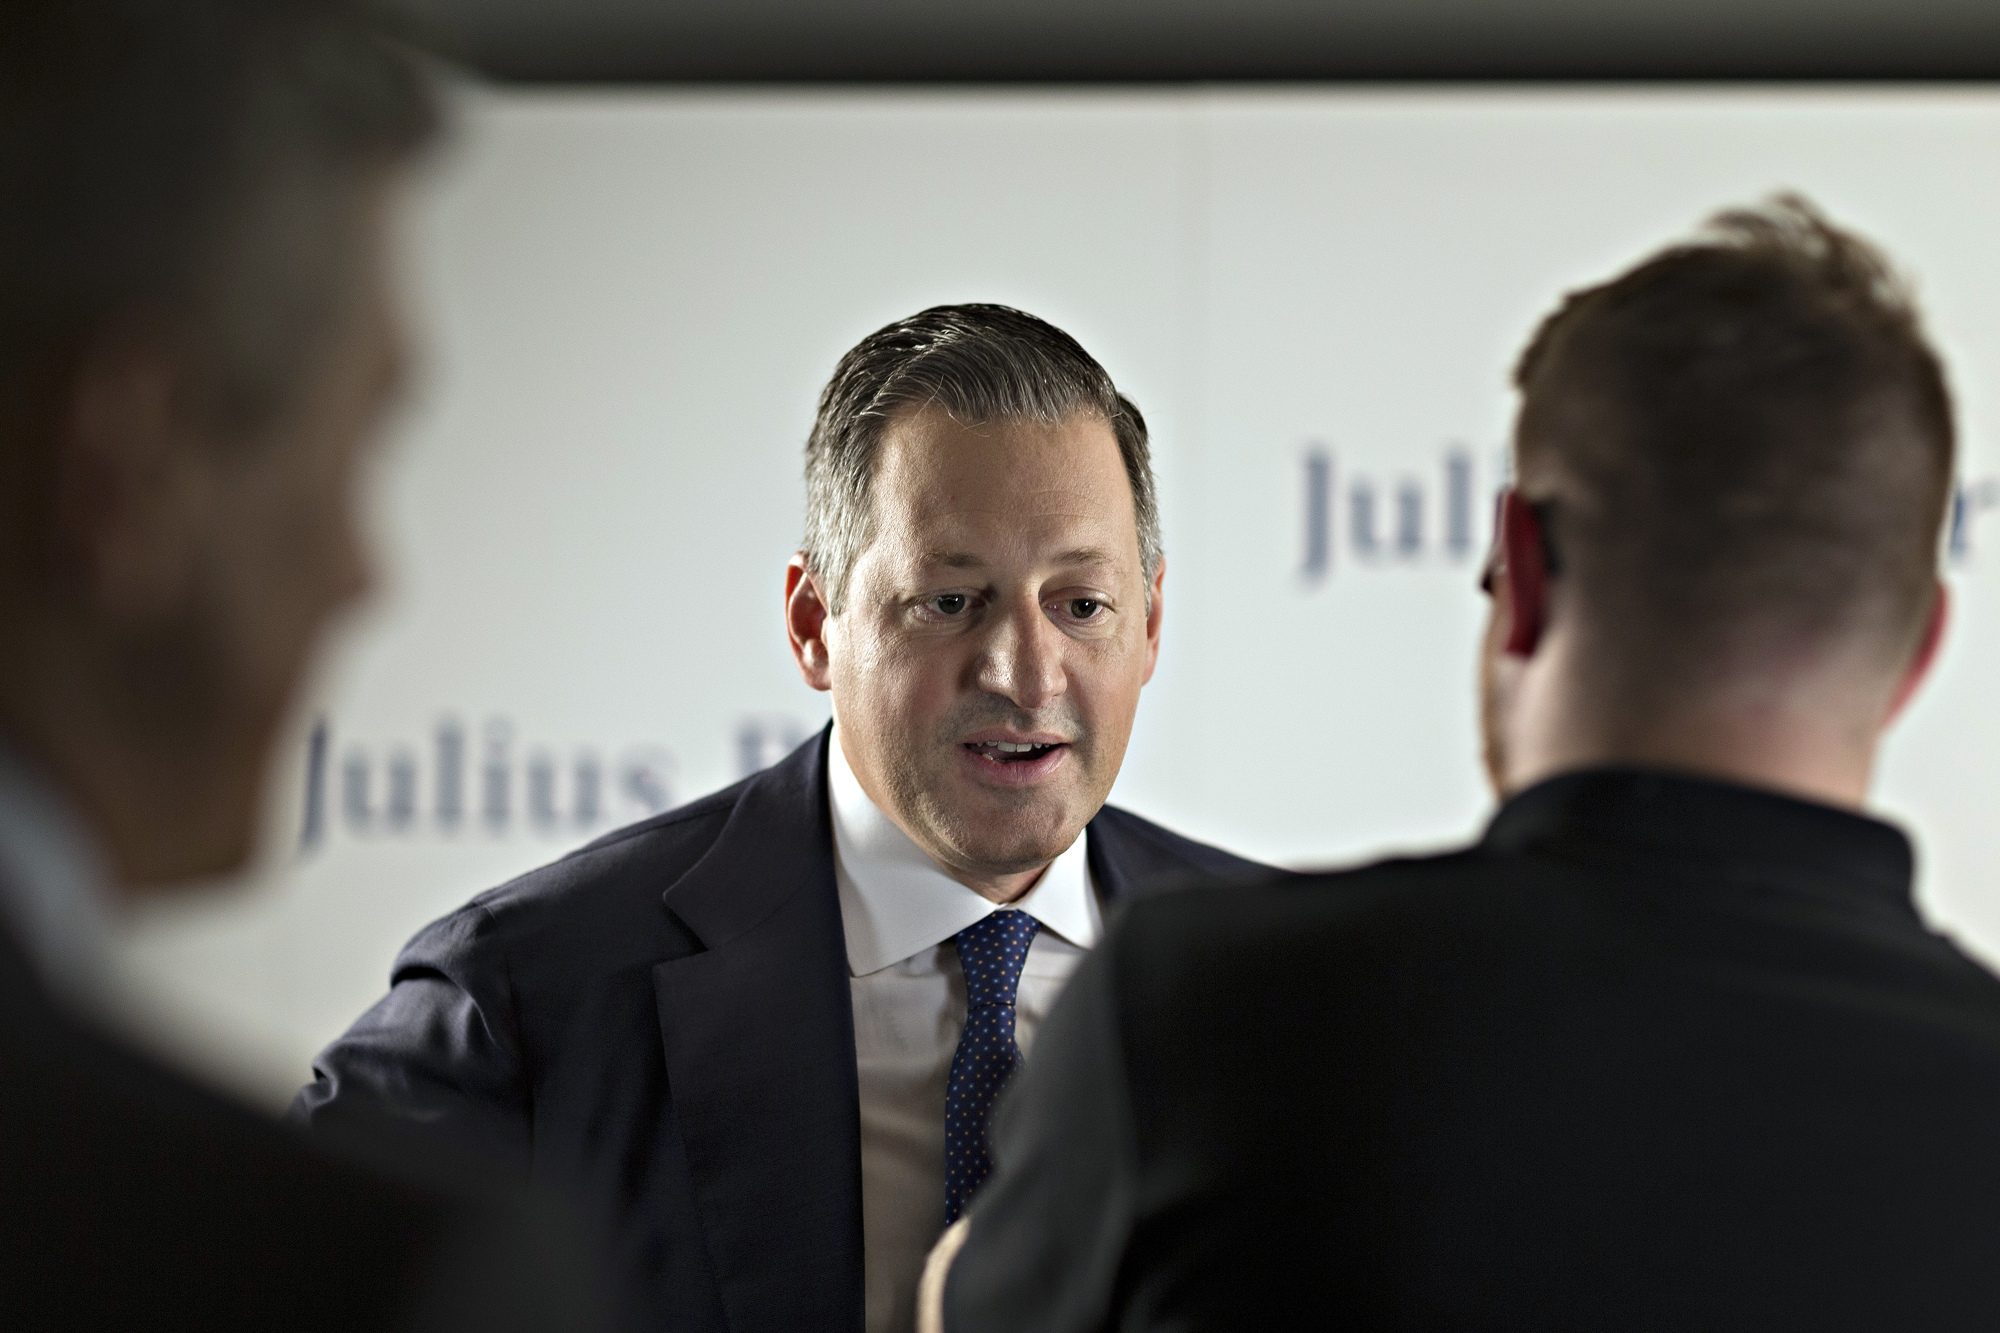 Swiss bank Julius Baer chief sees Asia making up a third of business